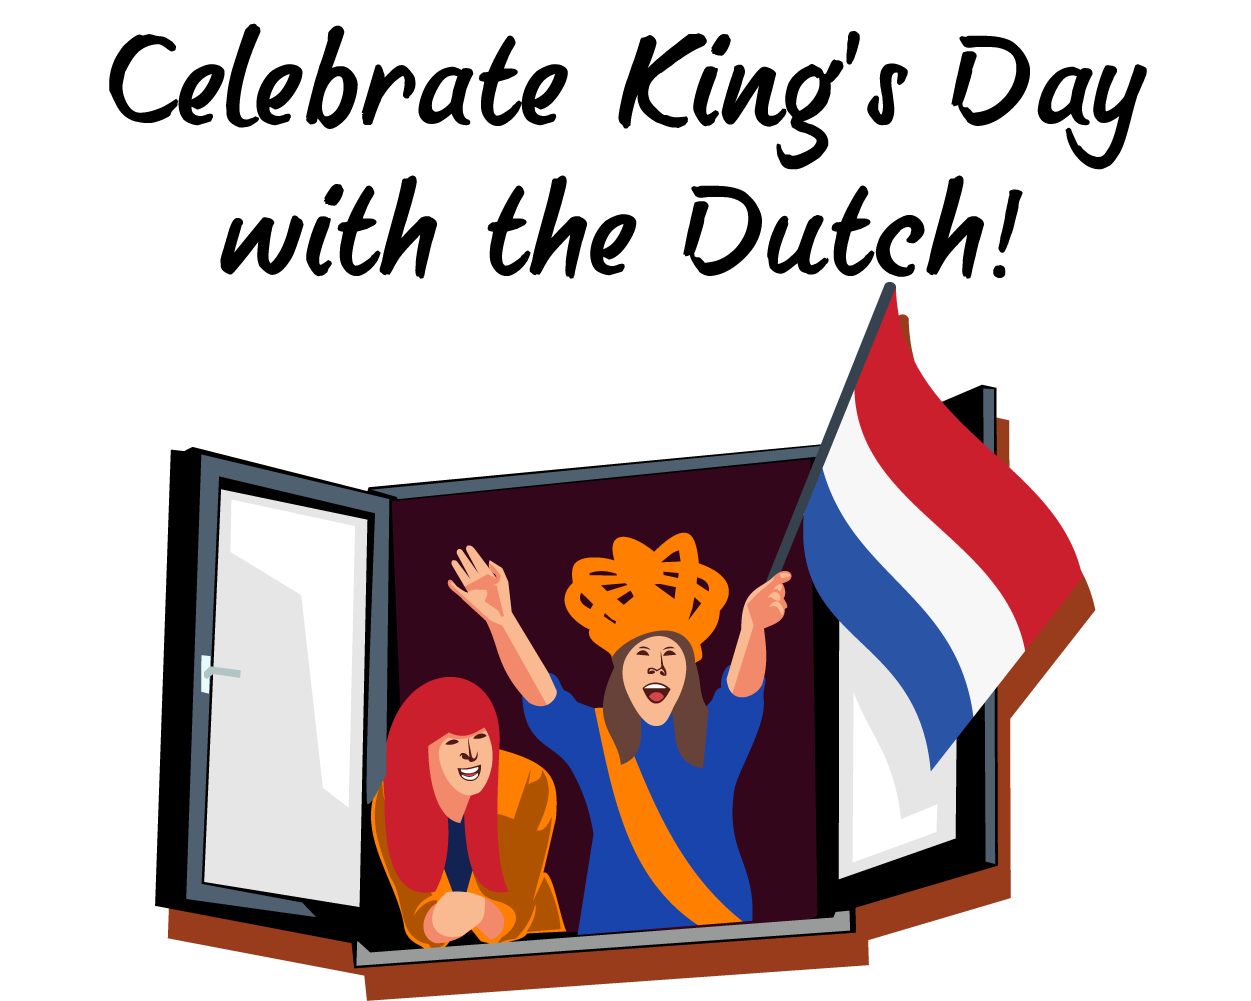 Dutch Kings Day offer: 25% discount on all Usenet products